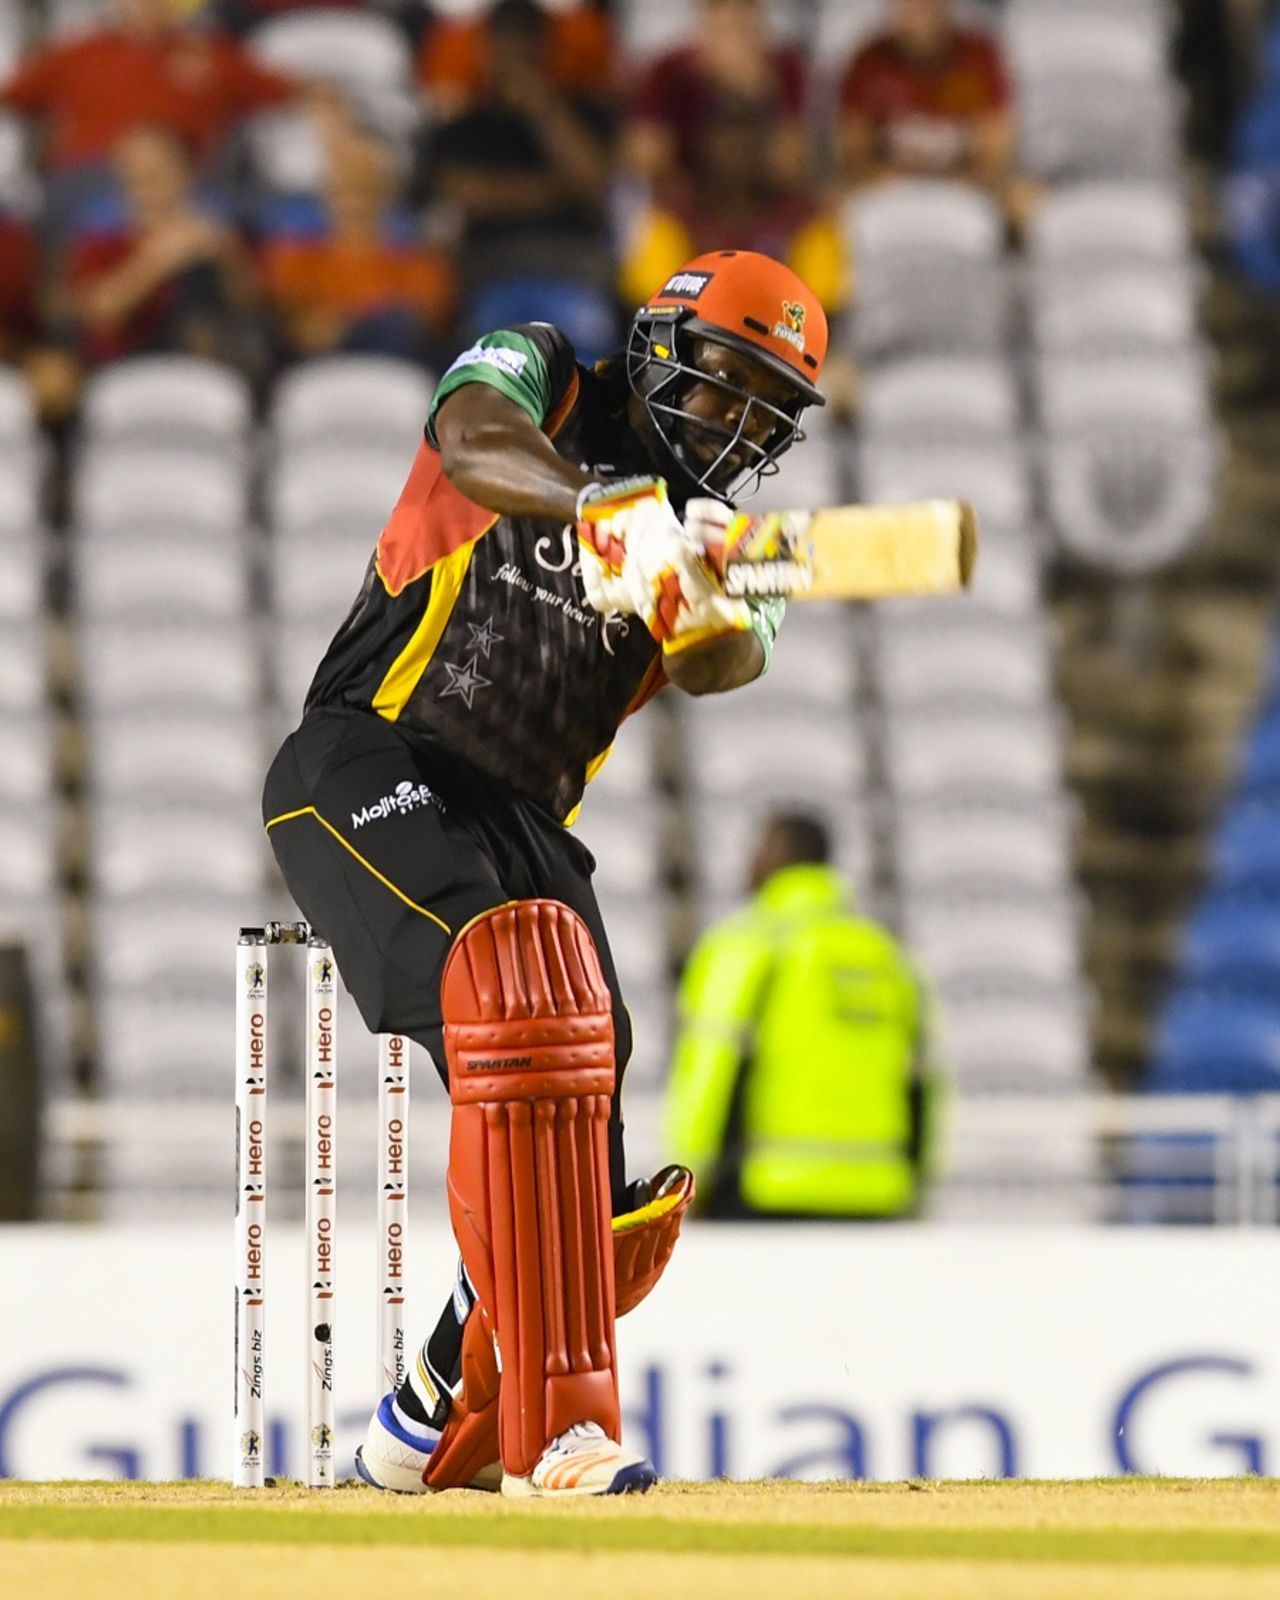 Chris Gayle carried his bat for Patriots to score 54, St Kitts and Nevis Patriots v Trinbago Knight Riders, CPL 1st Qualifier, Trinidad, 5 September, 2017